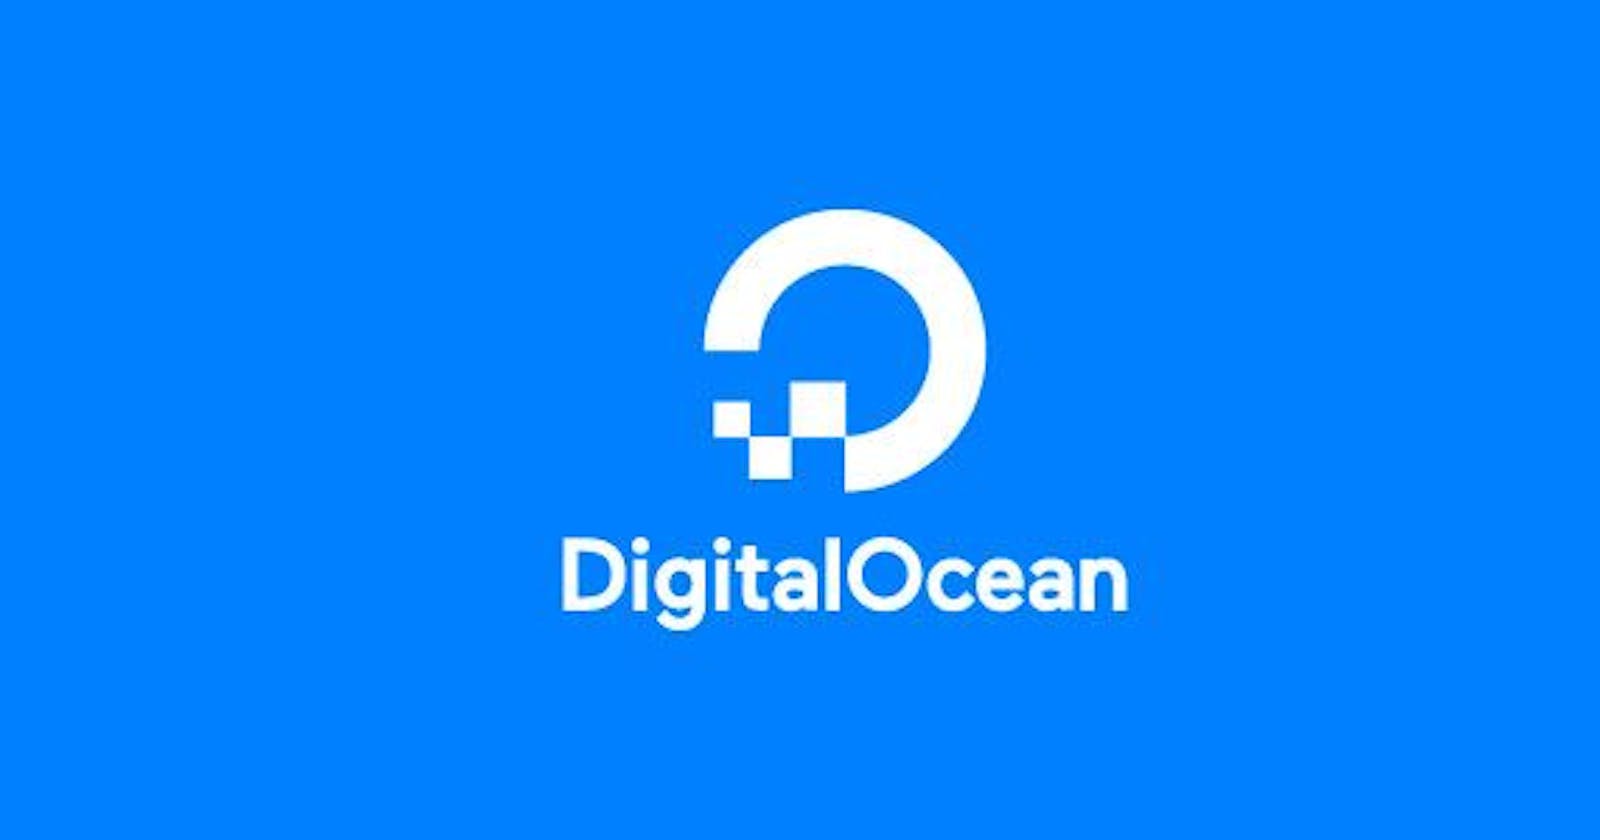 How to deploy a Nuxt Full Static site in DigitalOcean